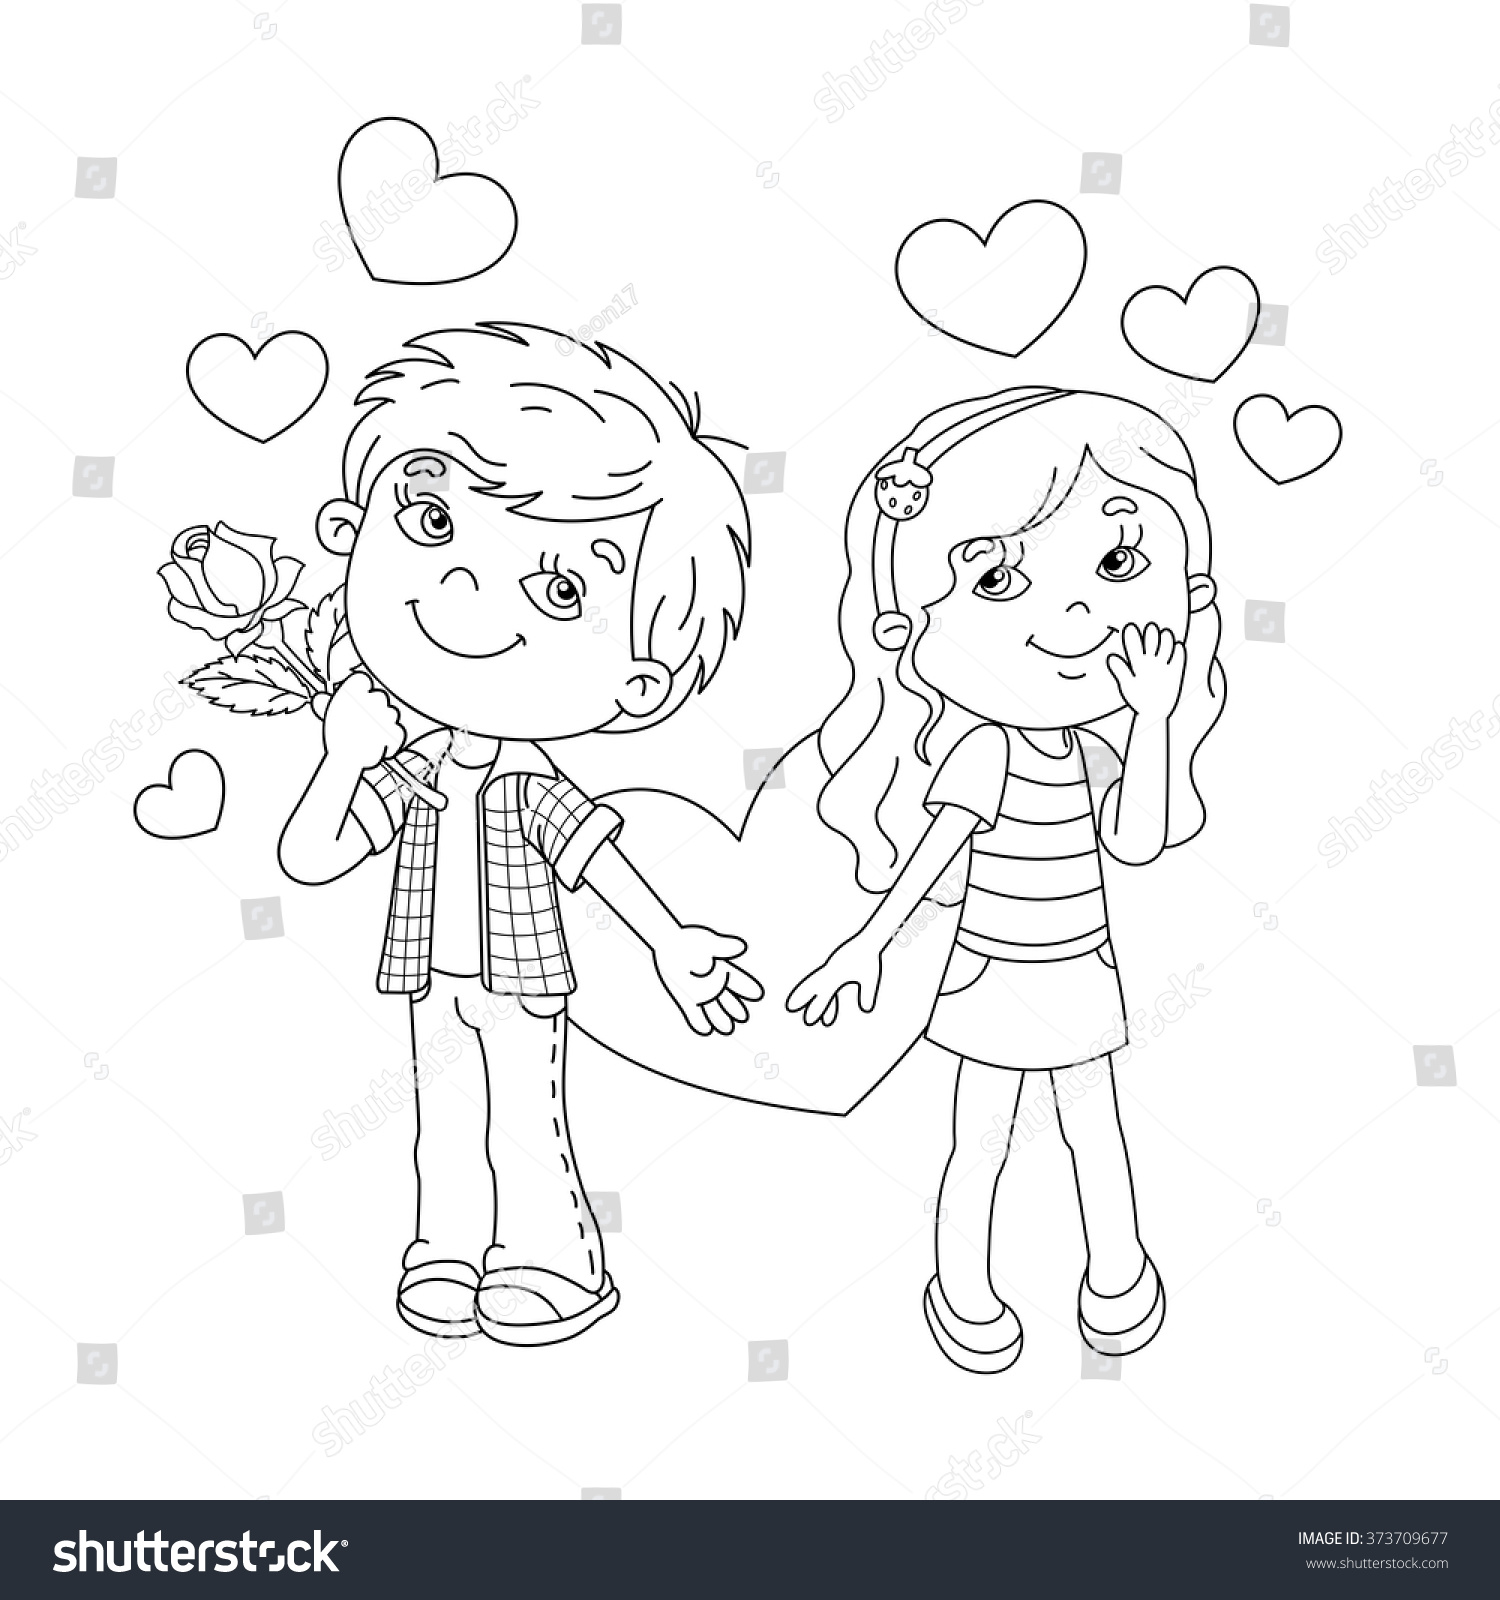 Coloring Page Outline cartoon Boy and girl with hearts Coloring book for kids